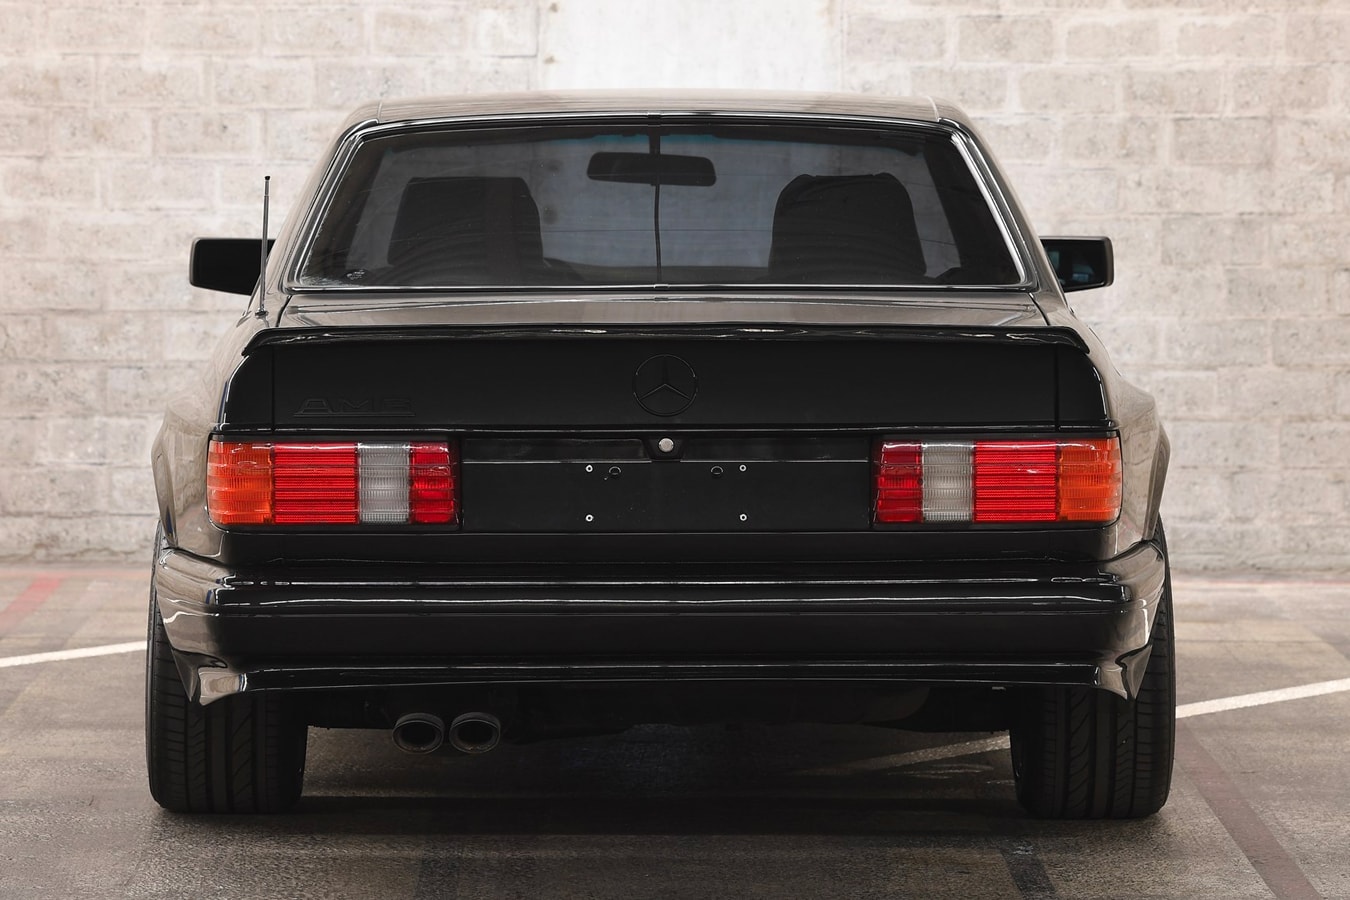 Mercedes Benz 1989 560 SEC AMG Wide Body Auction RM Sotheby's Benz Murdered-Out Blacked Out wide body Rims Engine 